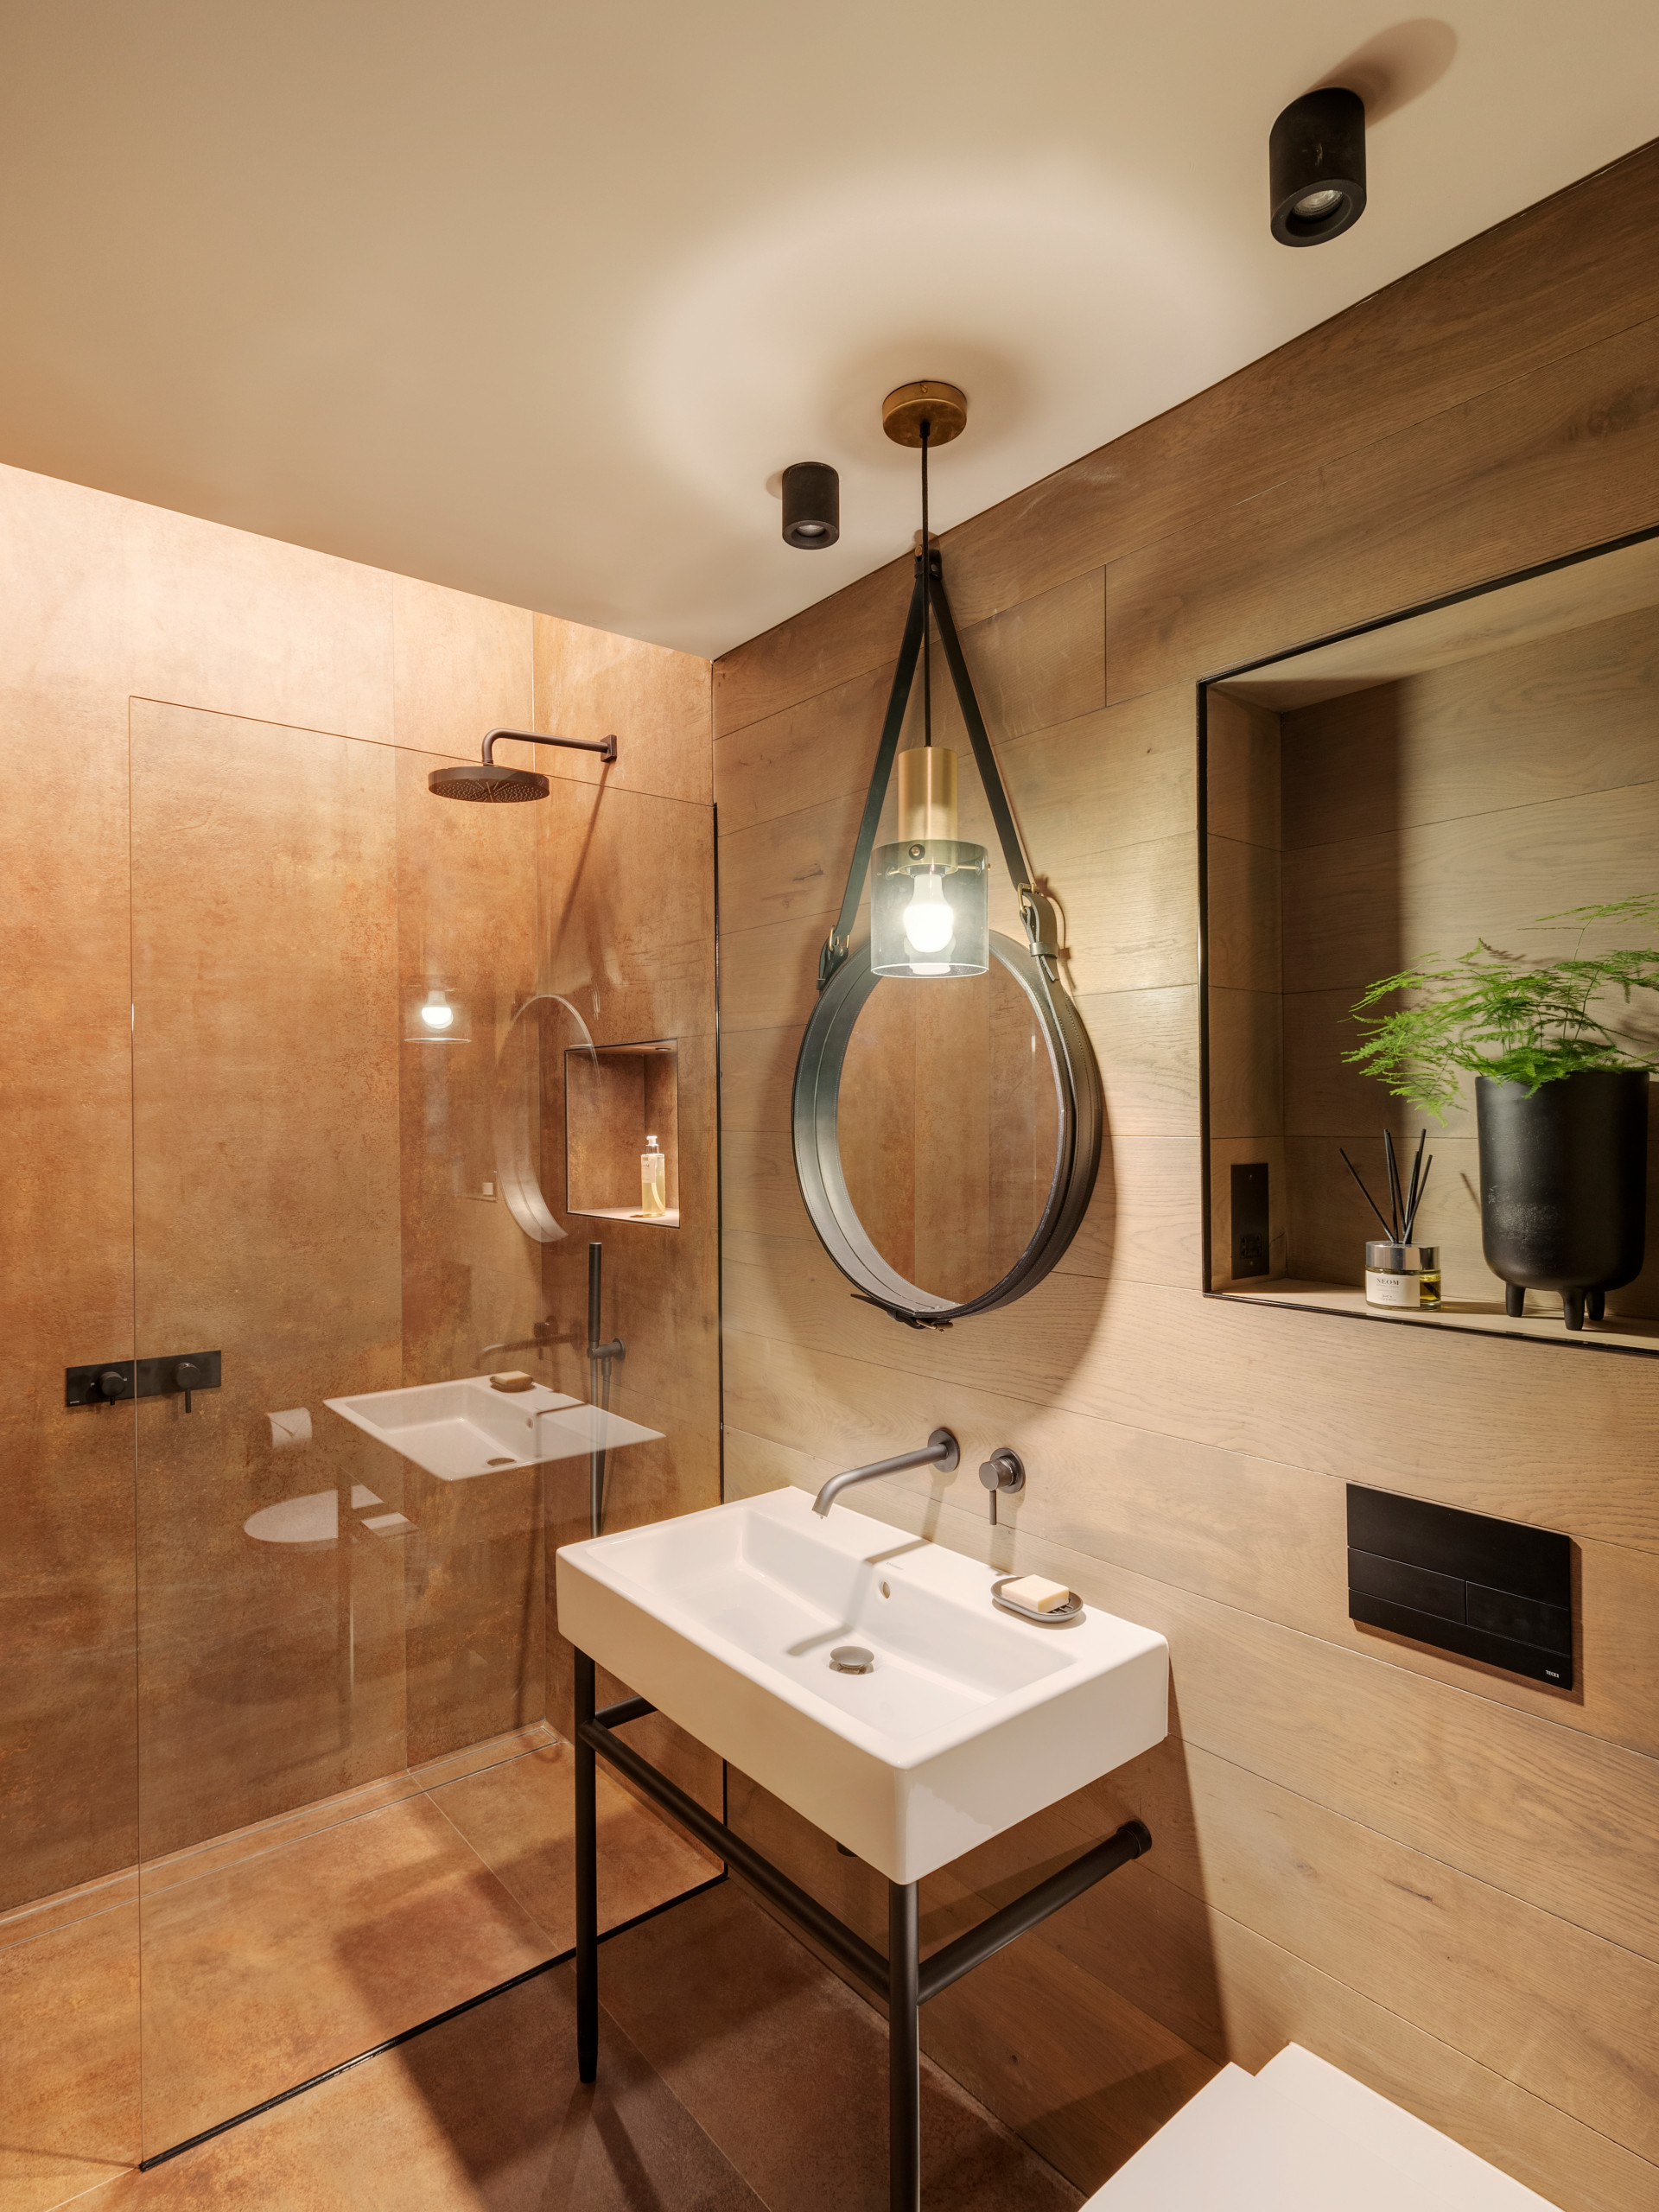 75 Beautiful Bathroom with Brown Tiles Ideas and Designs - February 2023 |  Houzz UK